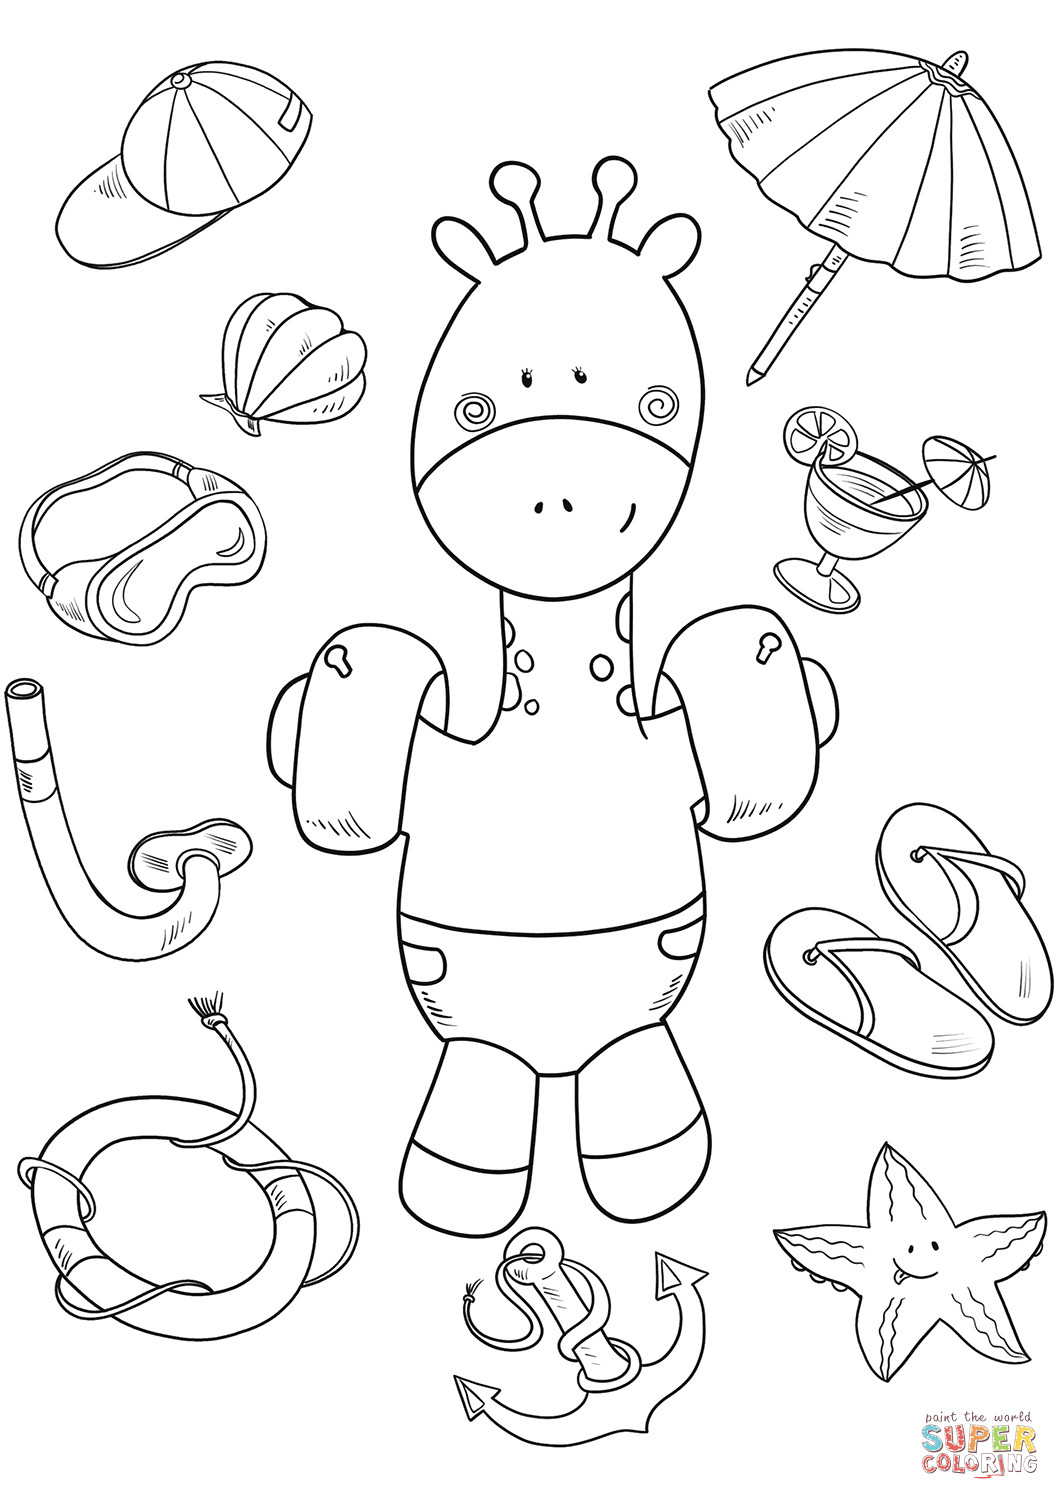 Baby Giraffe Coloring Page
 Baby Giraffe on the Beach coloring page